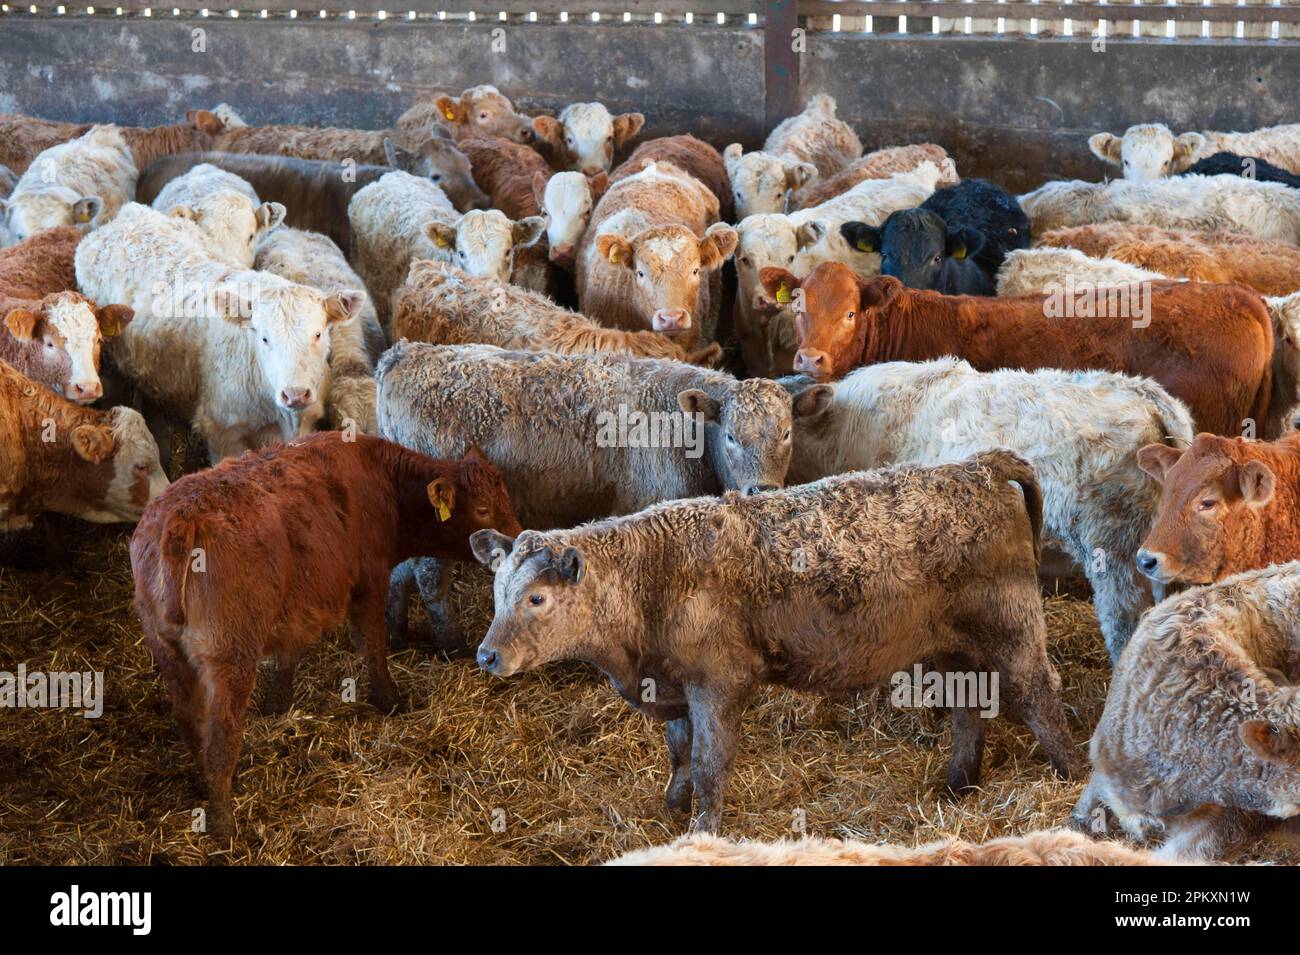 Domestic Cattle, mixed breeds of beef store cattle, herd in straw yard, Anglesey, North Wales, United Kingdom Stock Photo